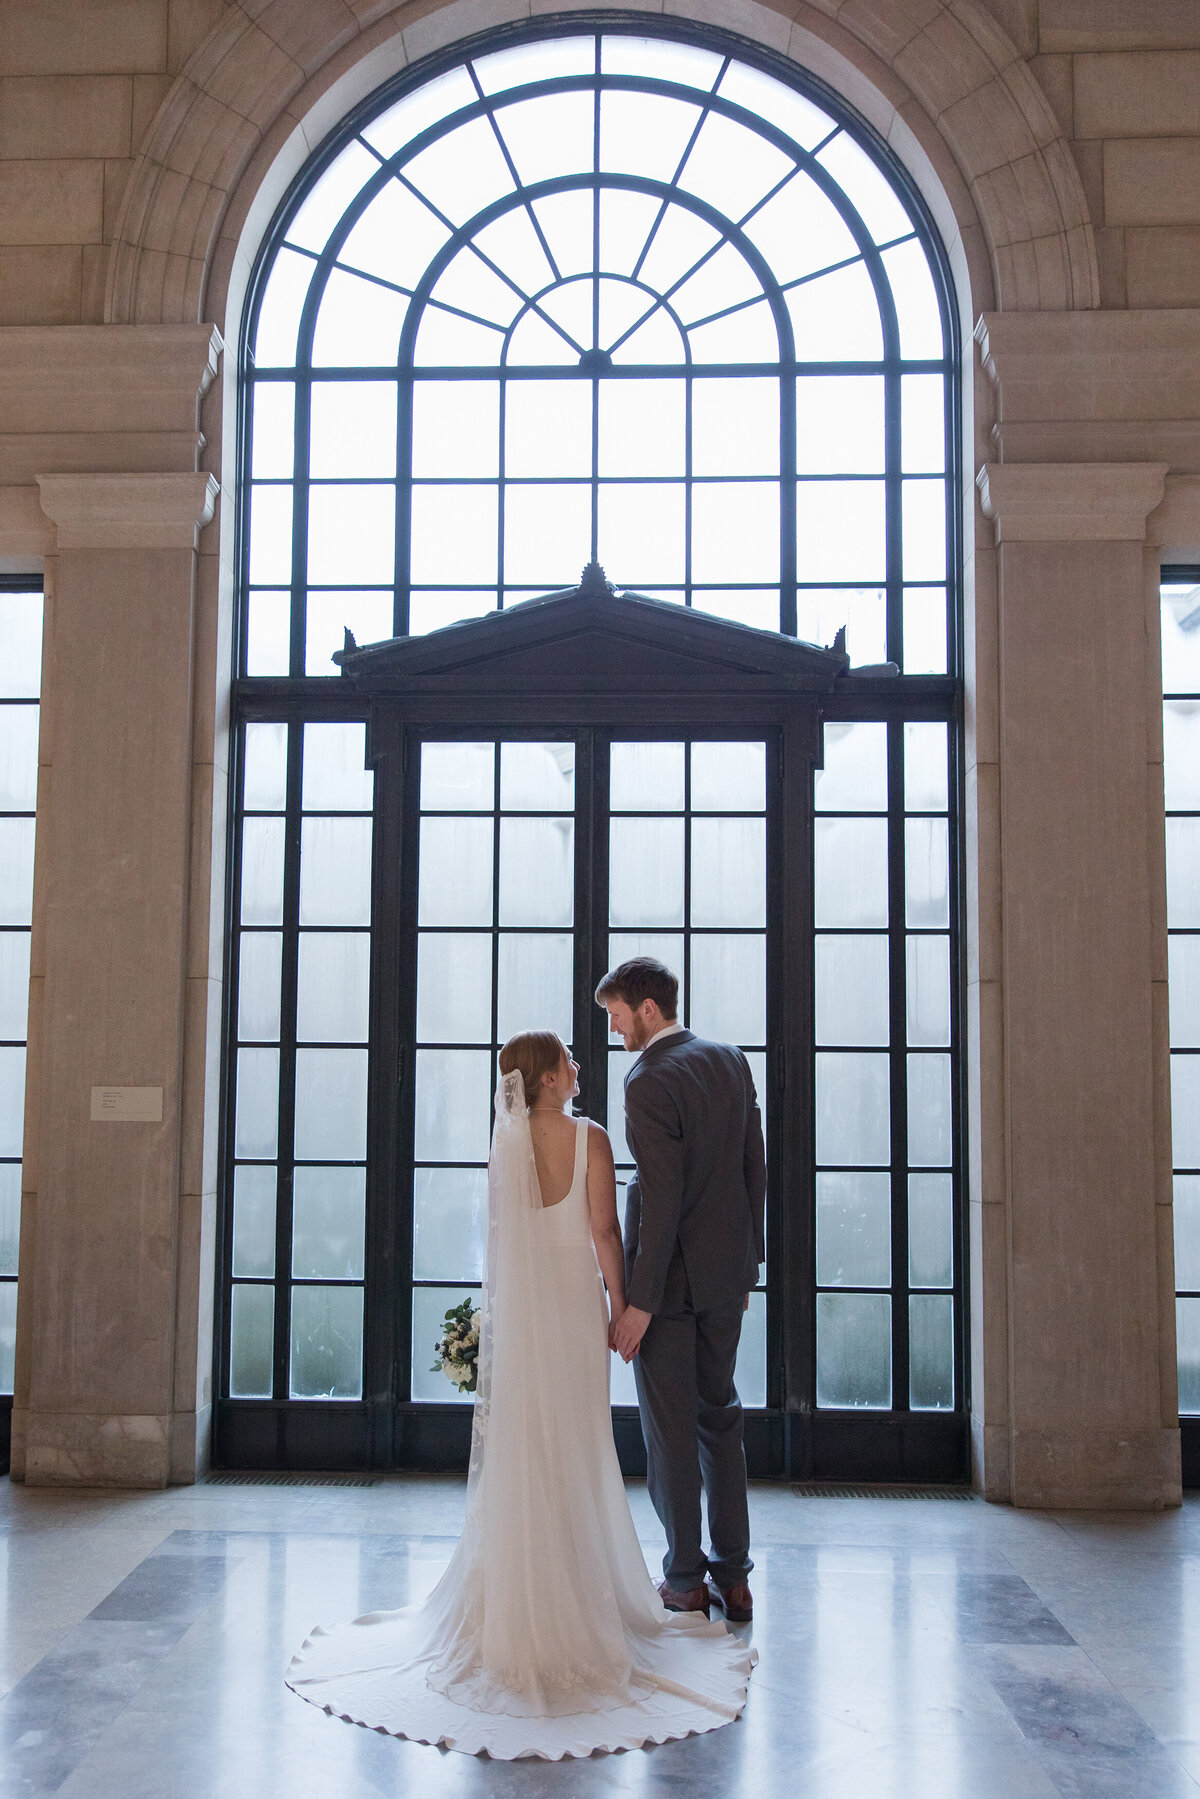 Baltimore Museum of Art wedding in Baltimore, Maryland by Christa Rae Photography